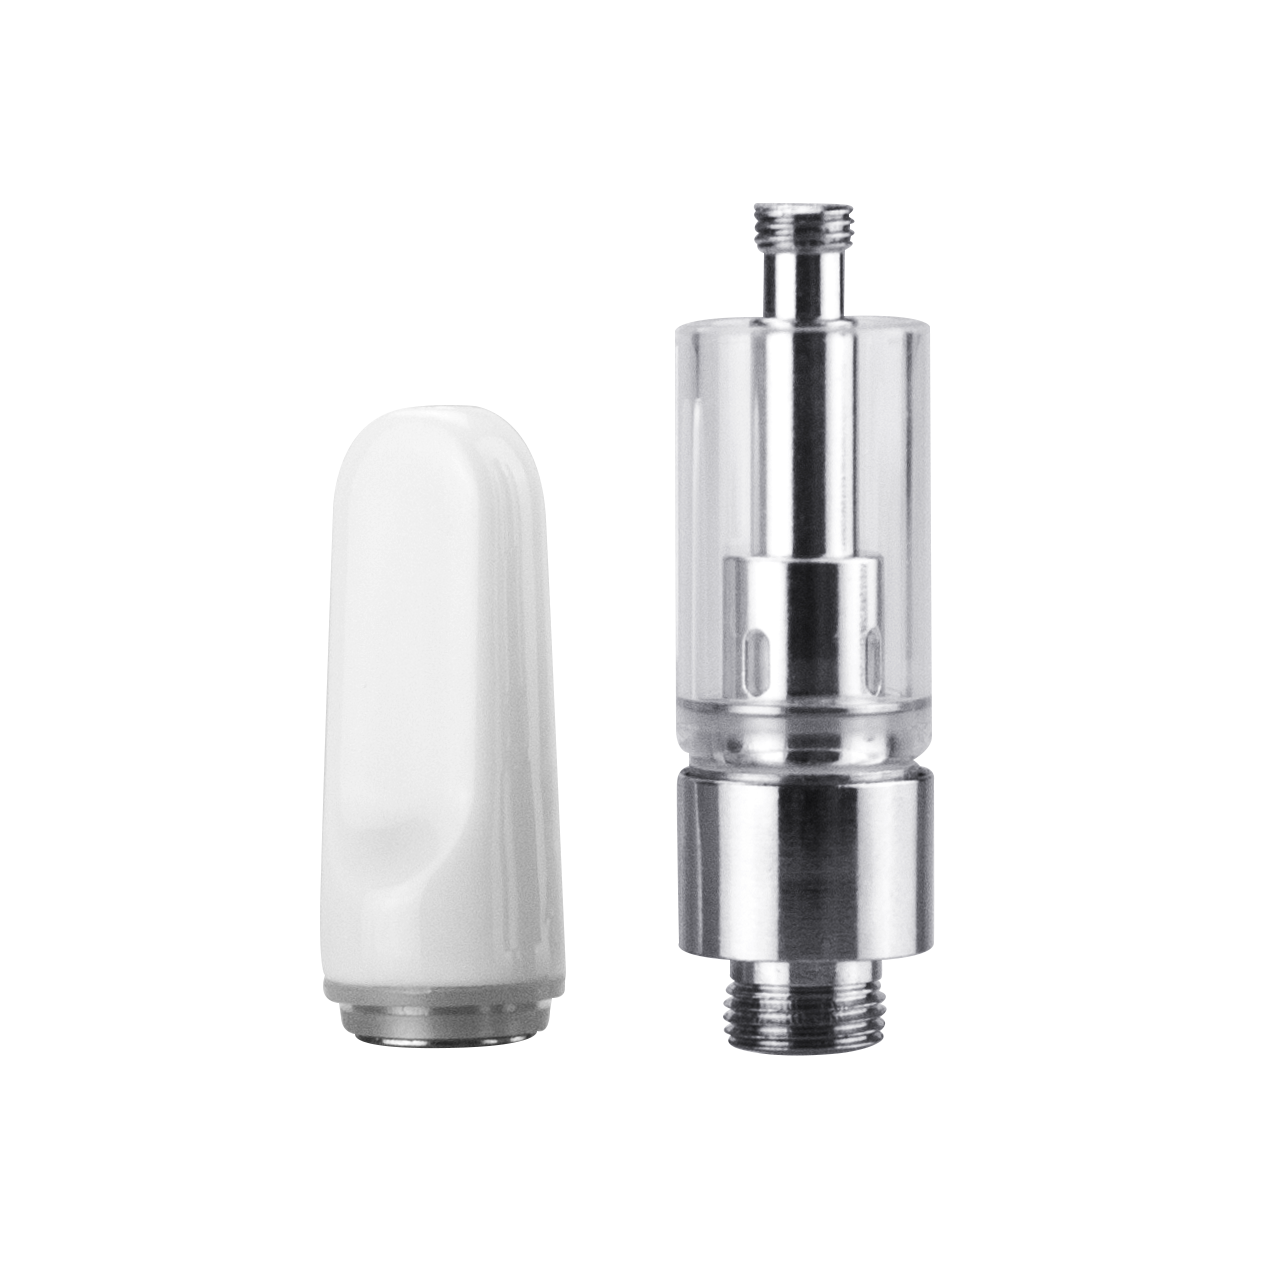 0.5 mL DM 023 510 thread vape cartridge with white ceramic tip detached from silver base